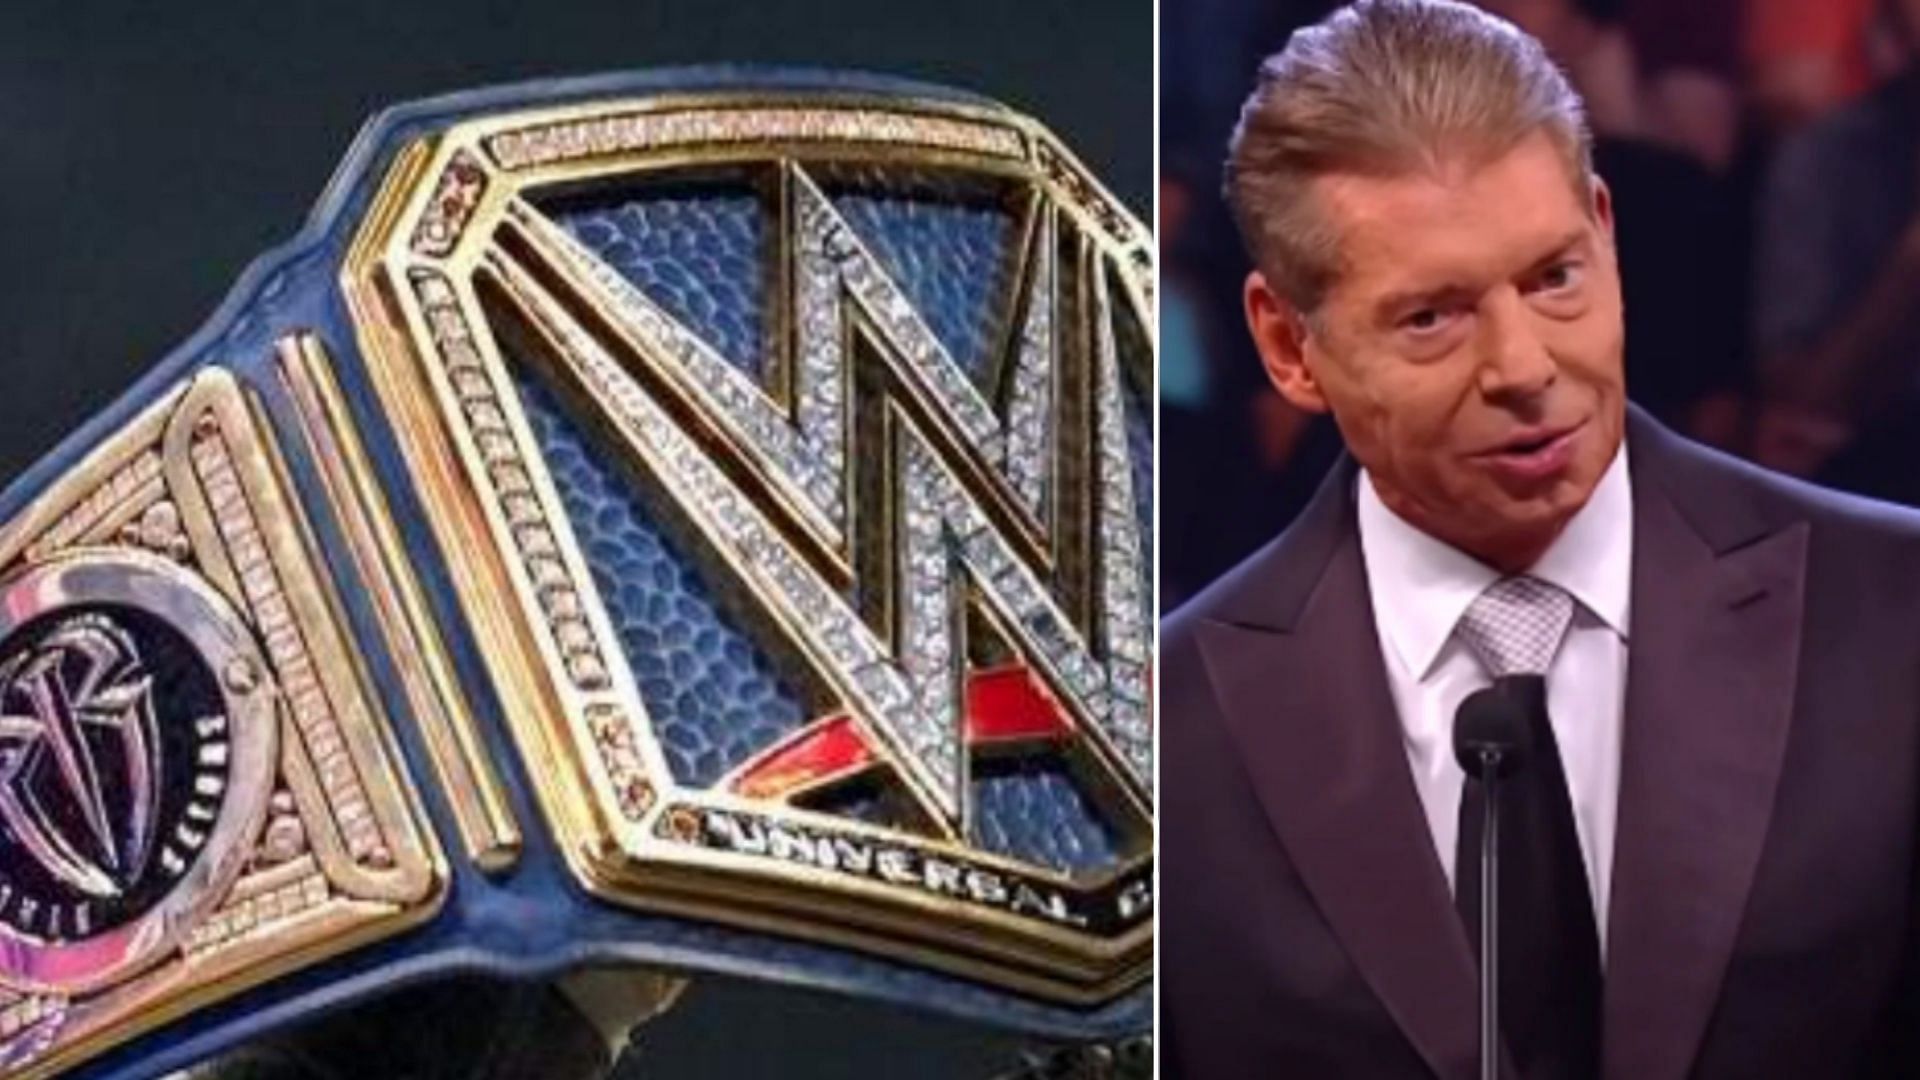 Many fan favorites have not received top-guy billing from Vince McMahon